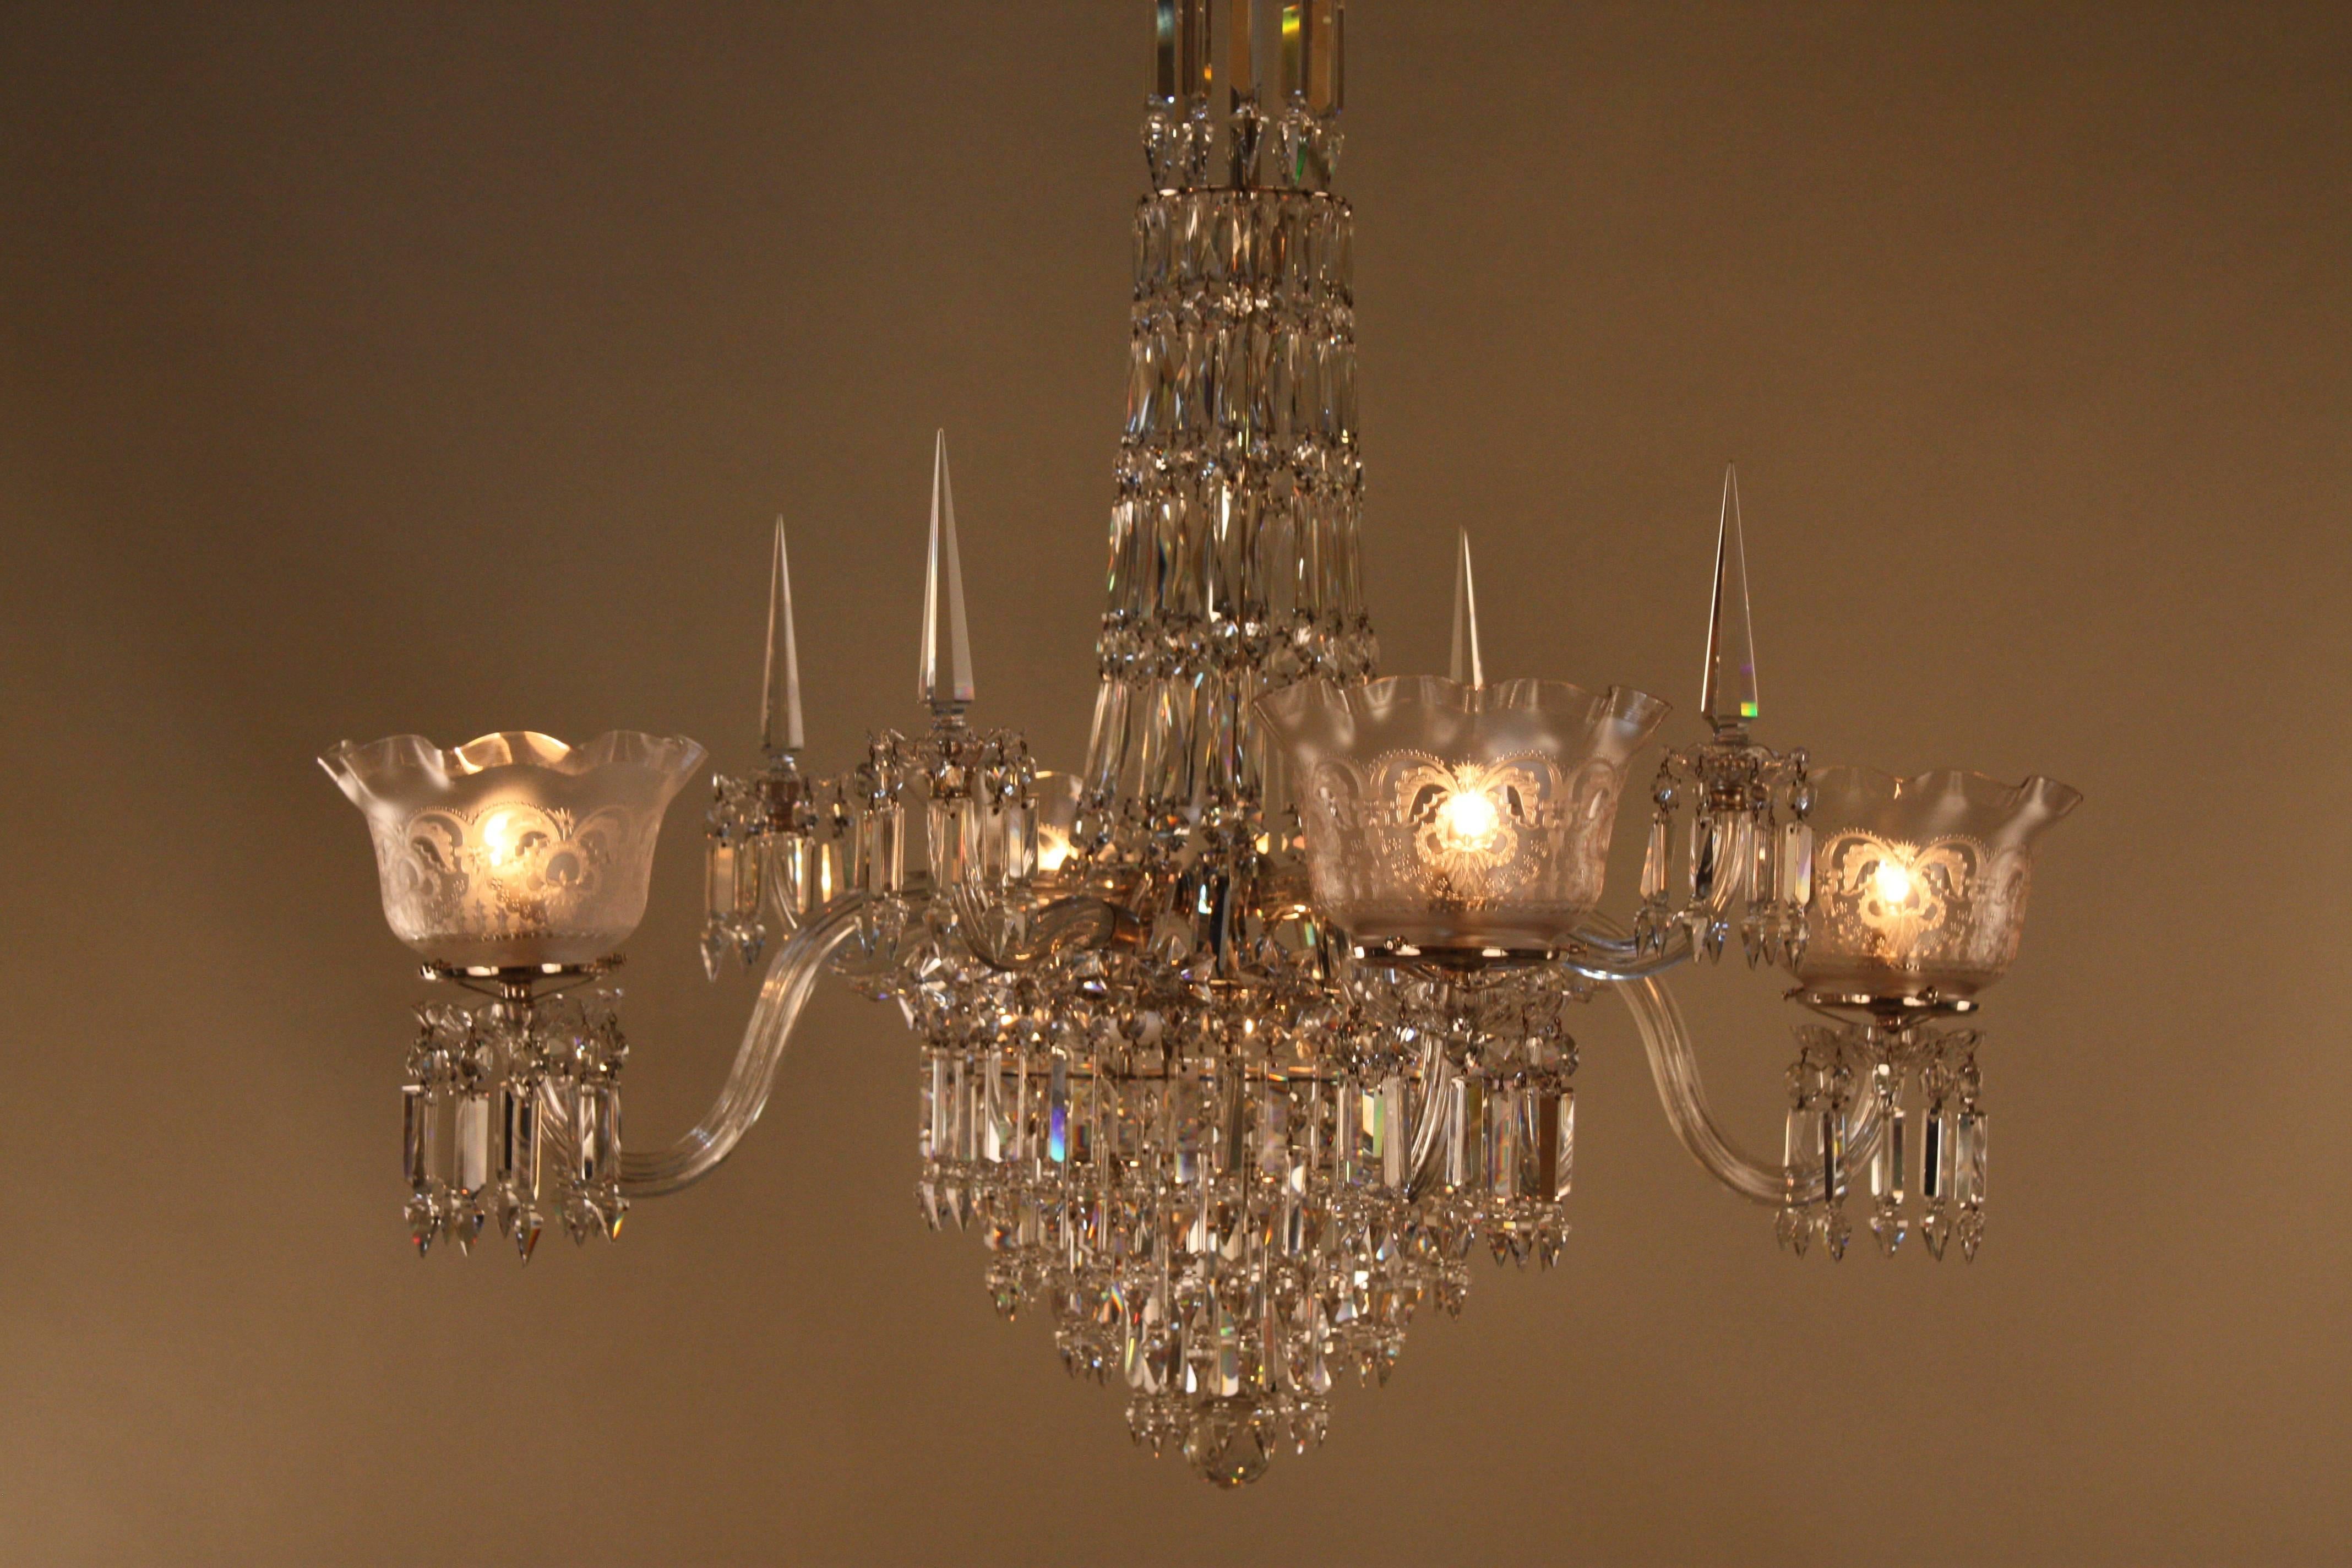 American 19th century four-arm hand polished crystal gas chandelier.
This chandelier has been professionally electrified.
Additional of three light has been added to the center of the chandelier which can be removed.